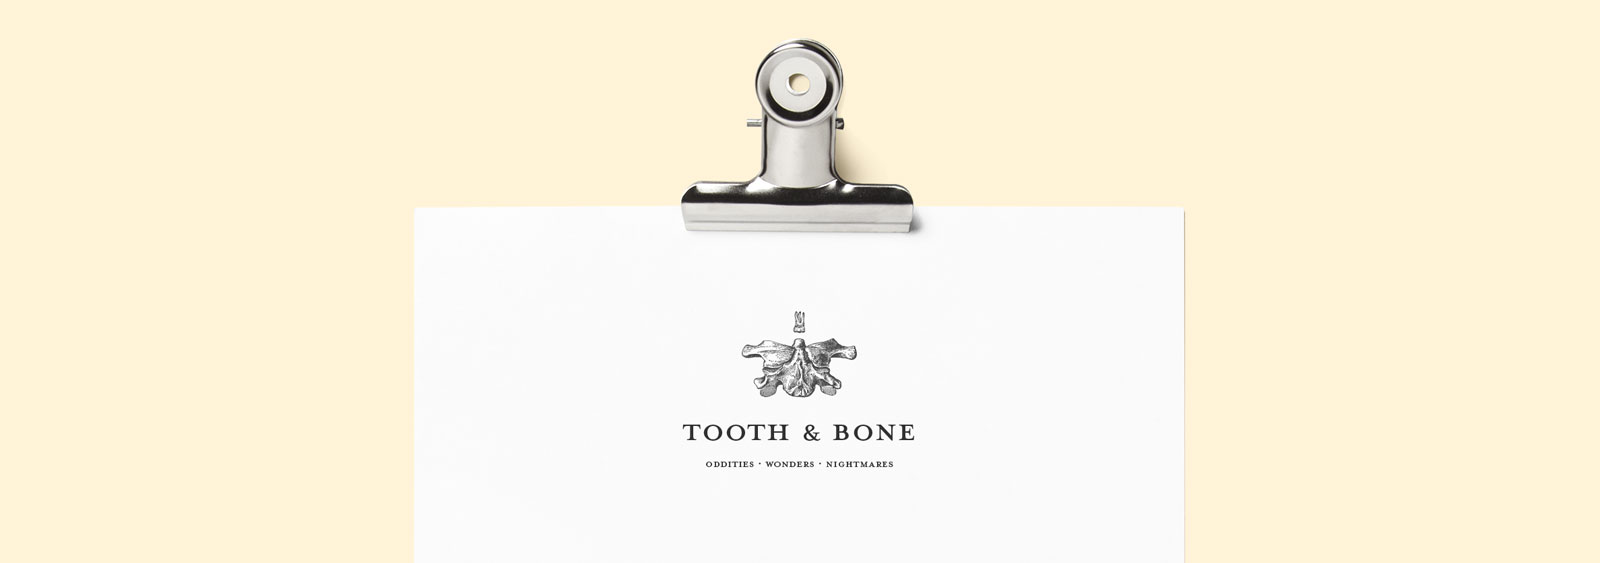 Tooth & Bone identity design by Noisy Ghost Co.